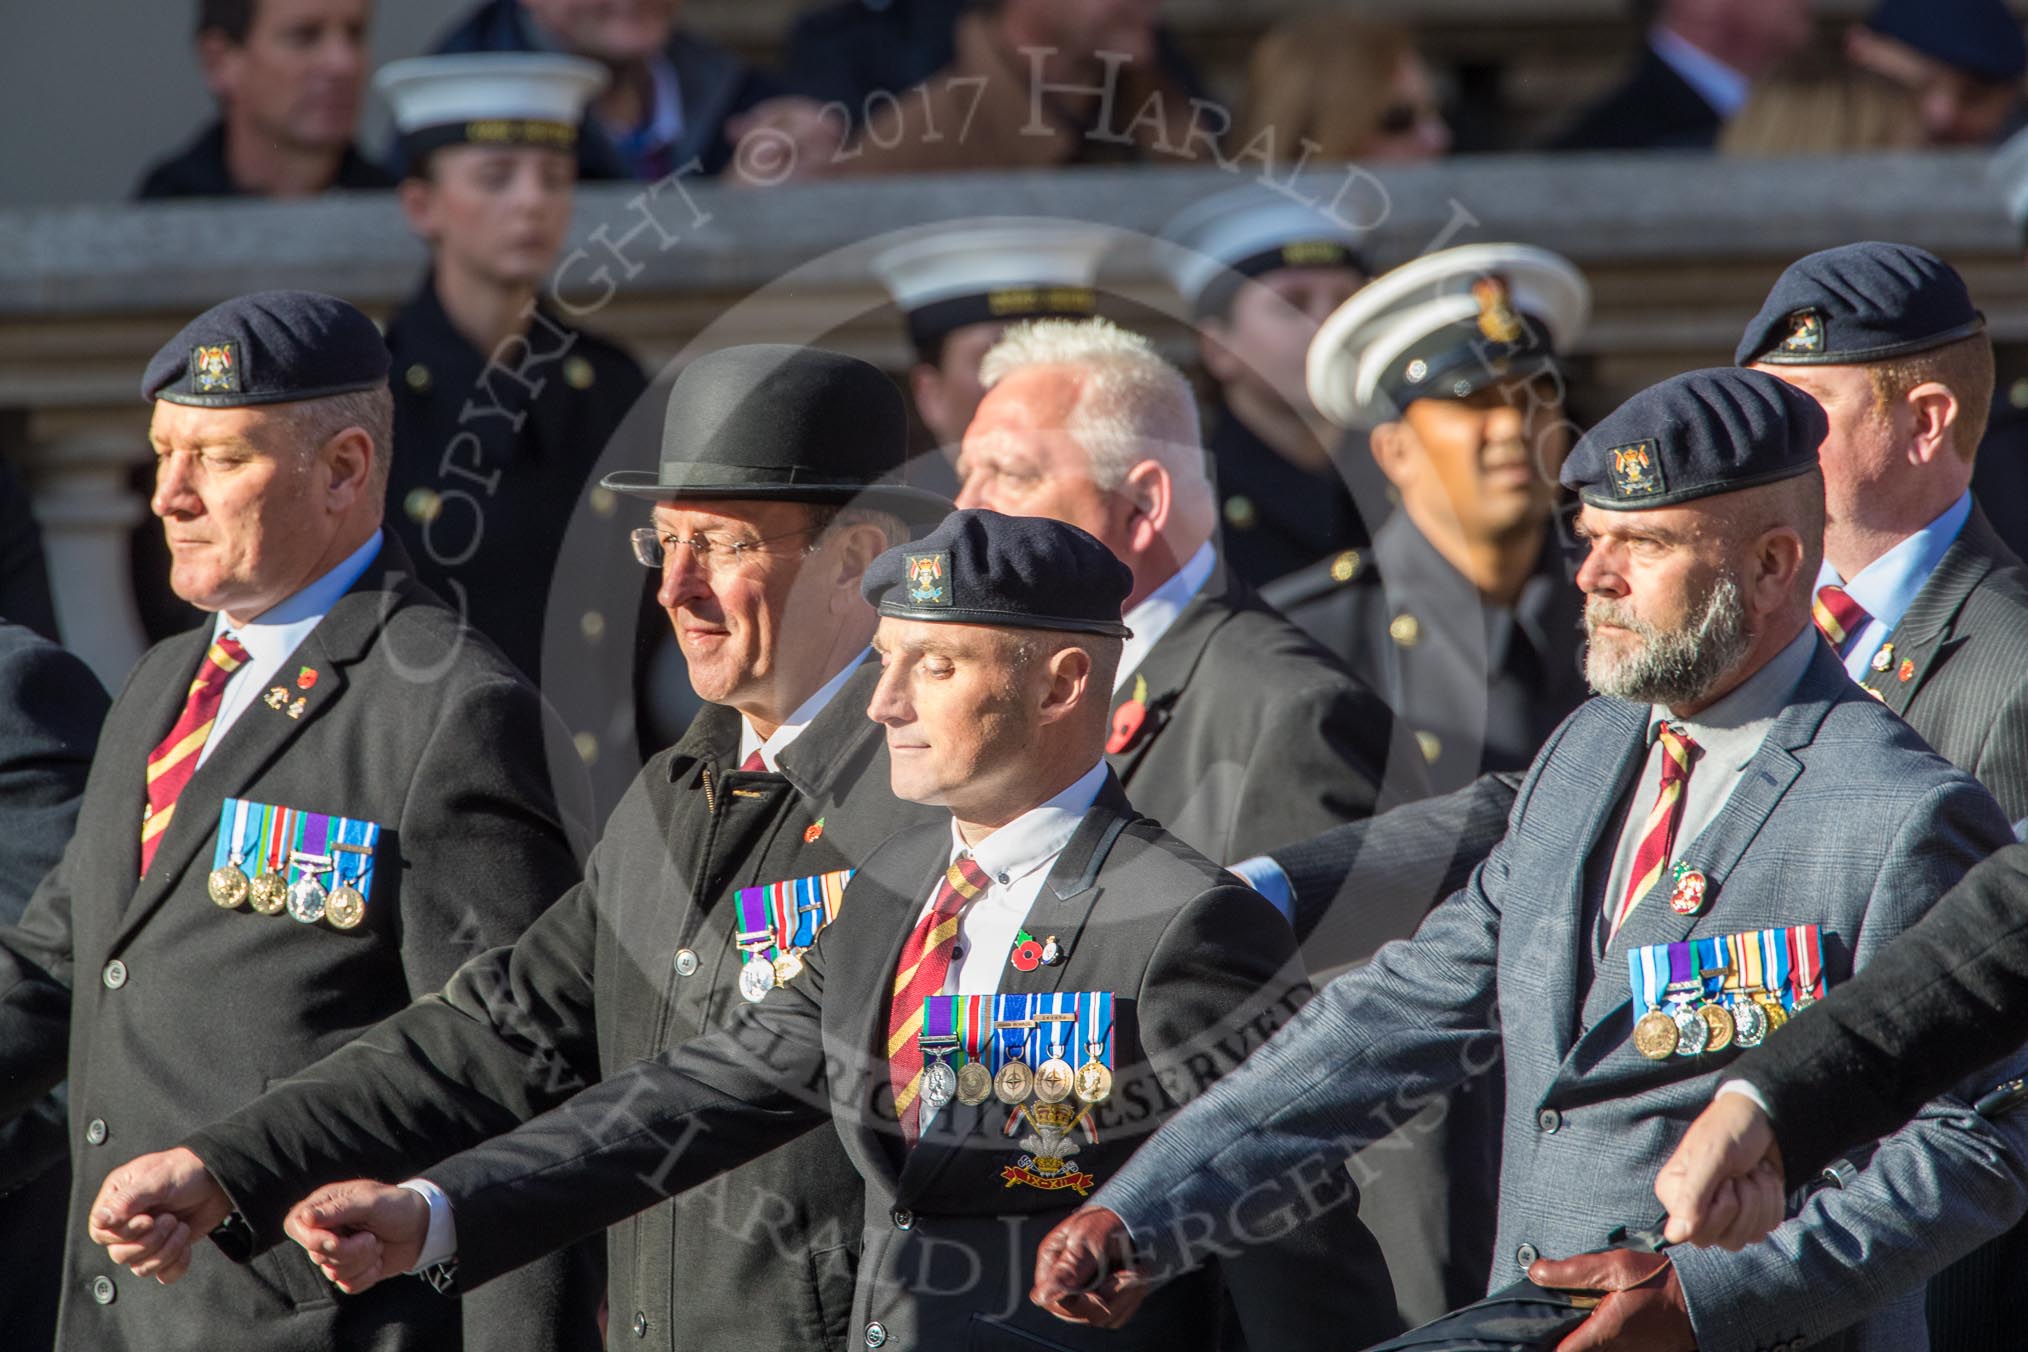 The Royal Lancers (Group B22, 24 members) during the Royal British Legion March Past on Remembrance Sunday at the Cenotaph, Whitehall, Westminster, London, 11 November 2018, 12:10.